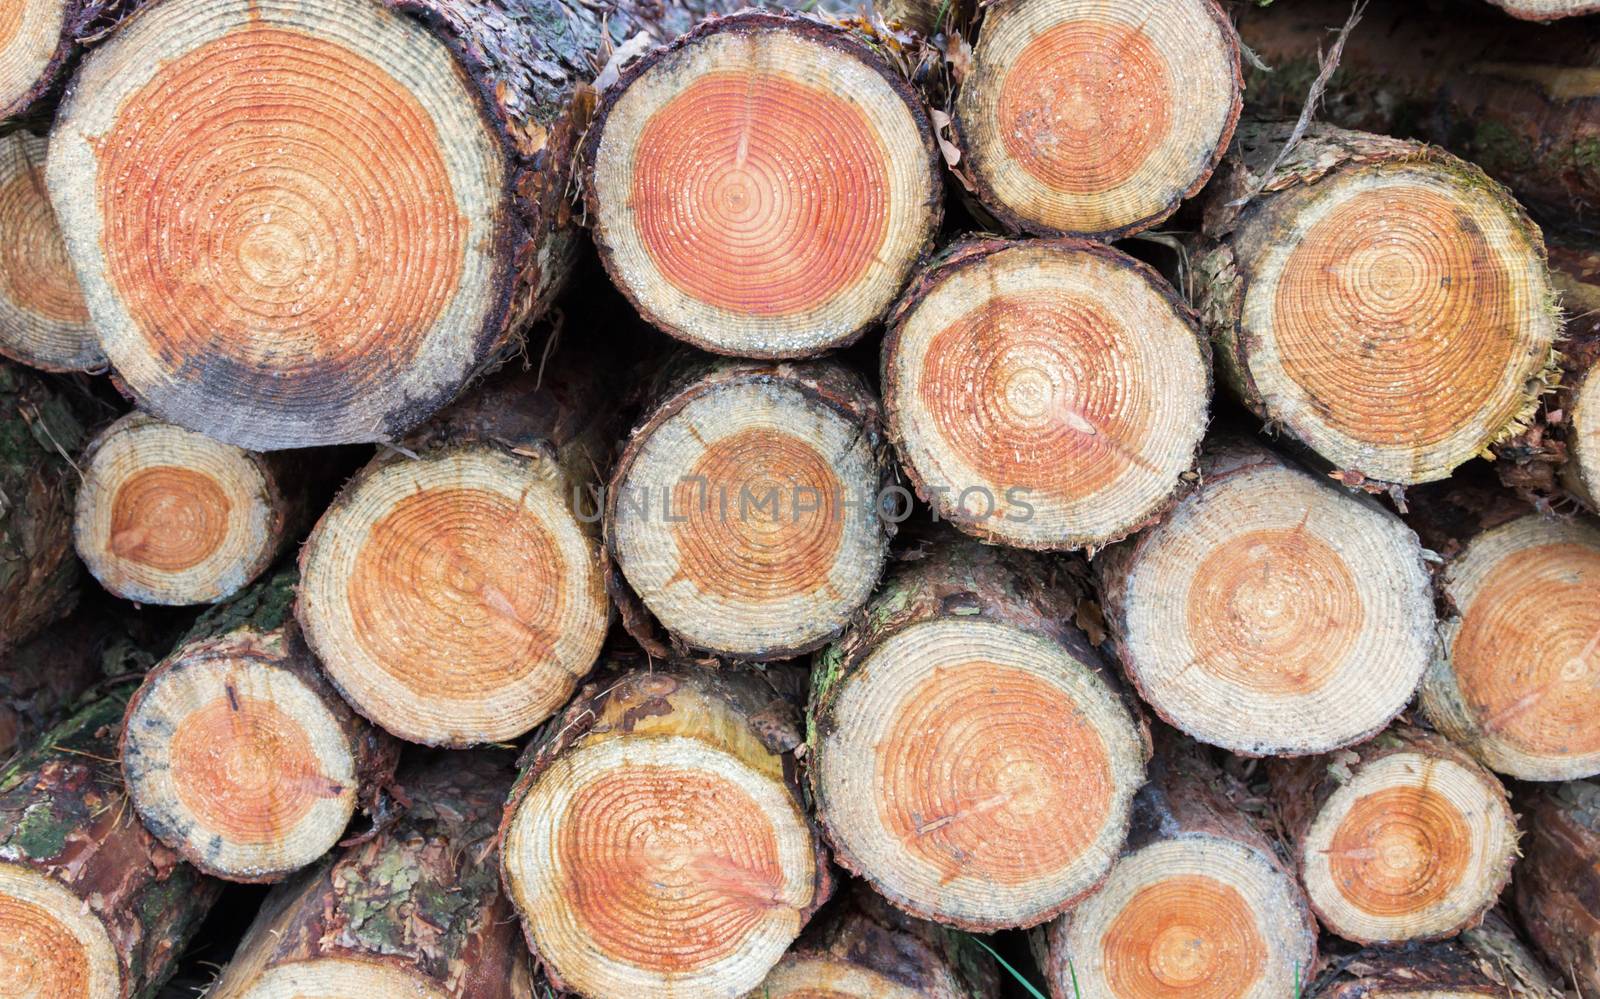 Cross sections of pine trunks piled together for burning in winter season